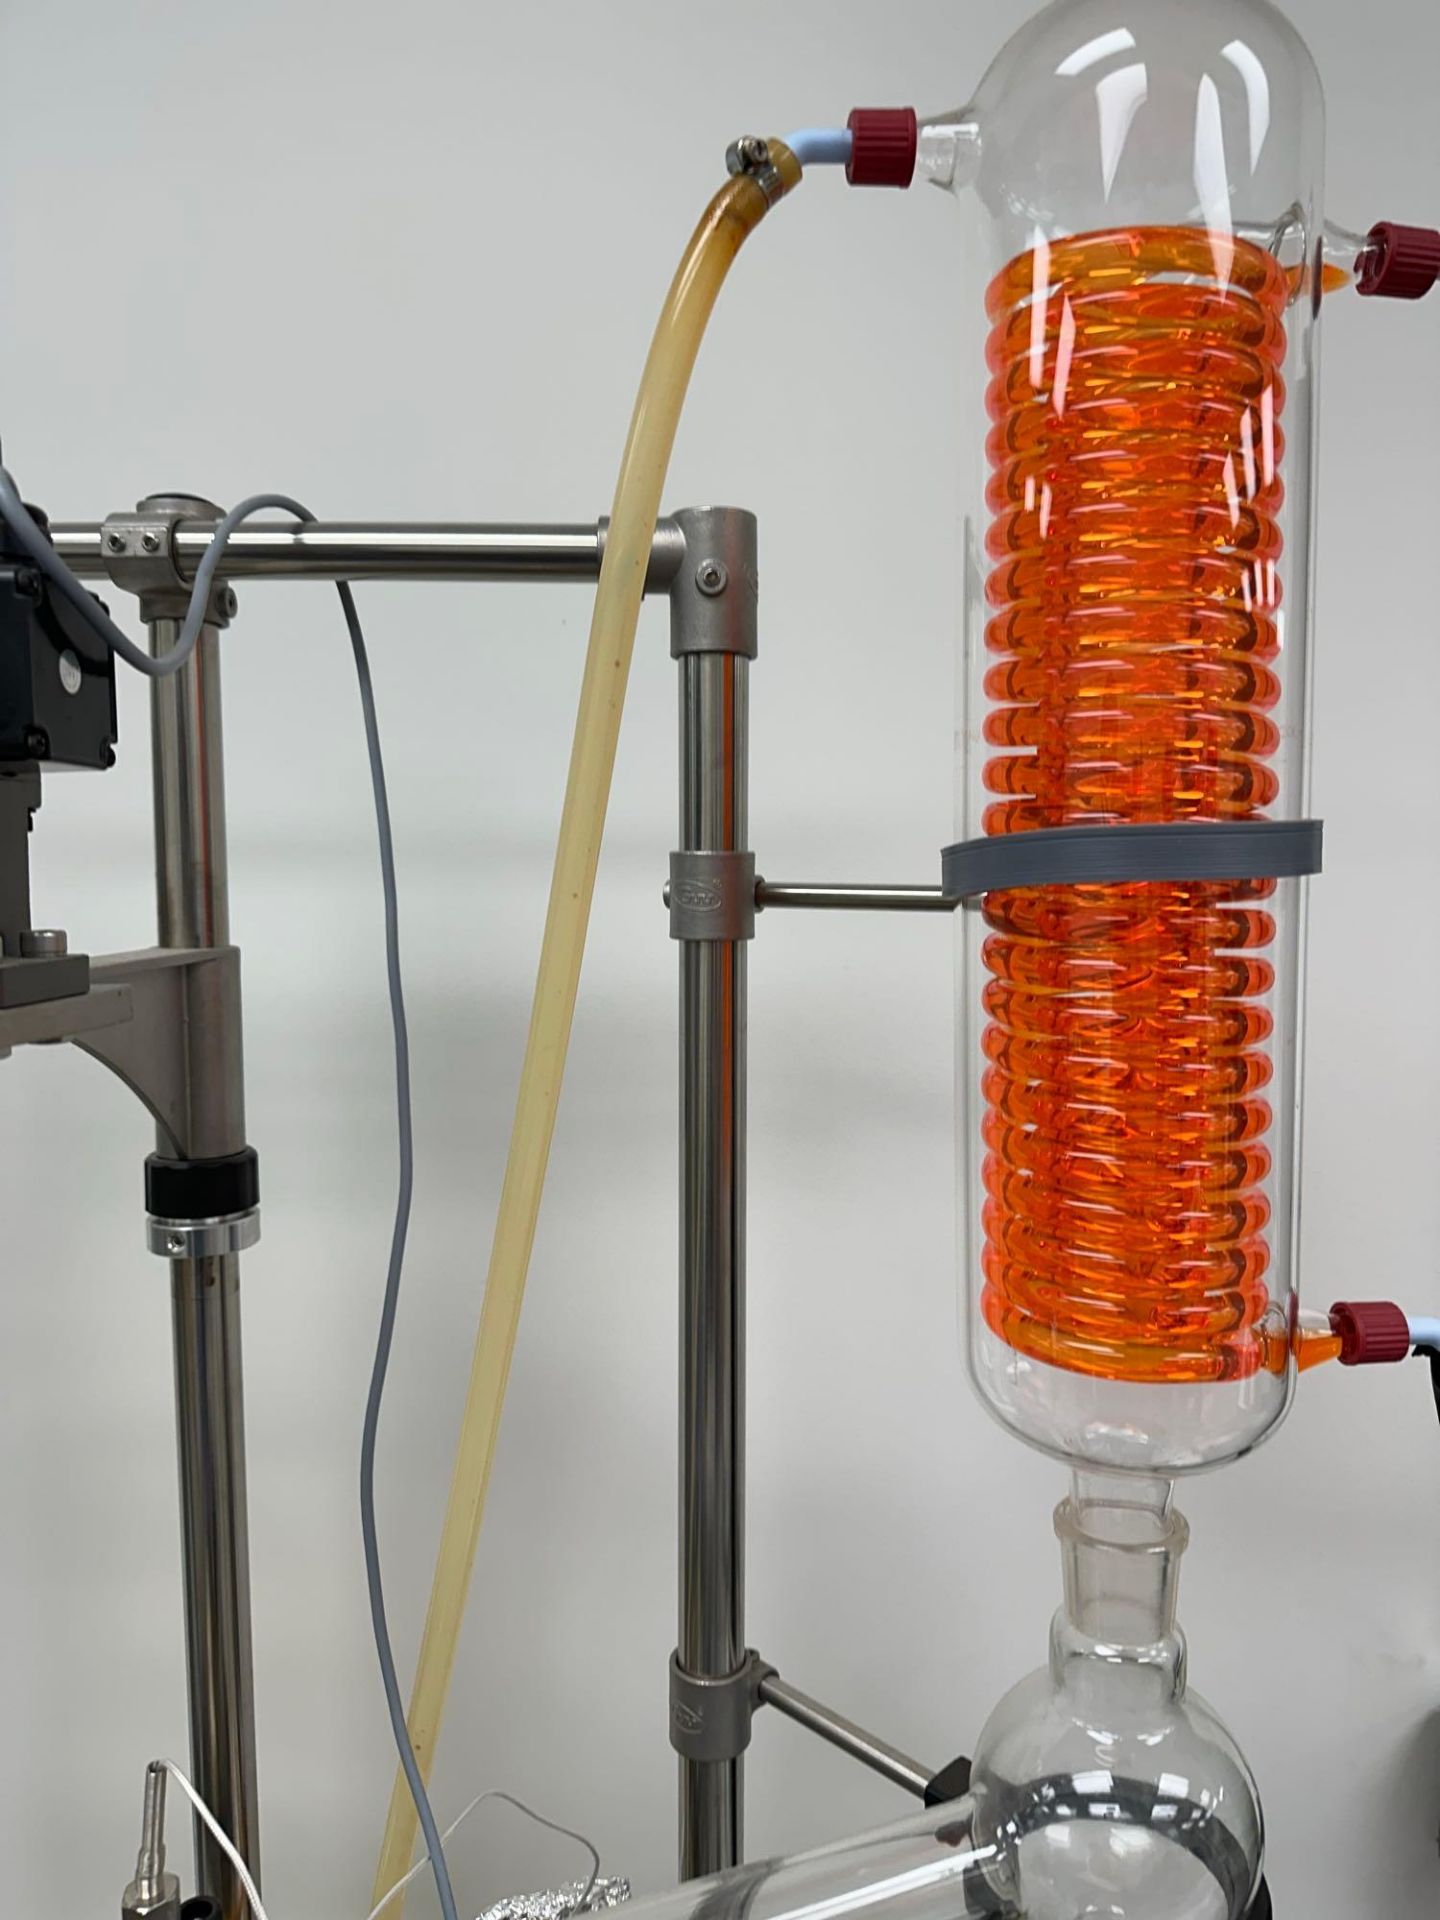 Across International R50 50,000 mL Jacketed Glass Reactor - Image 7 of 11